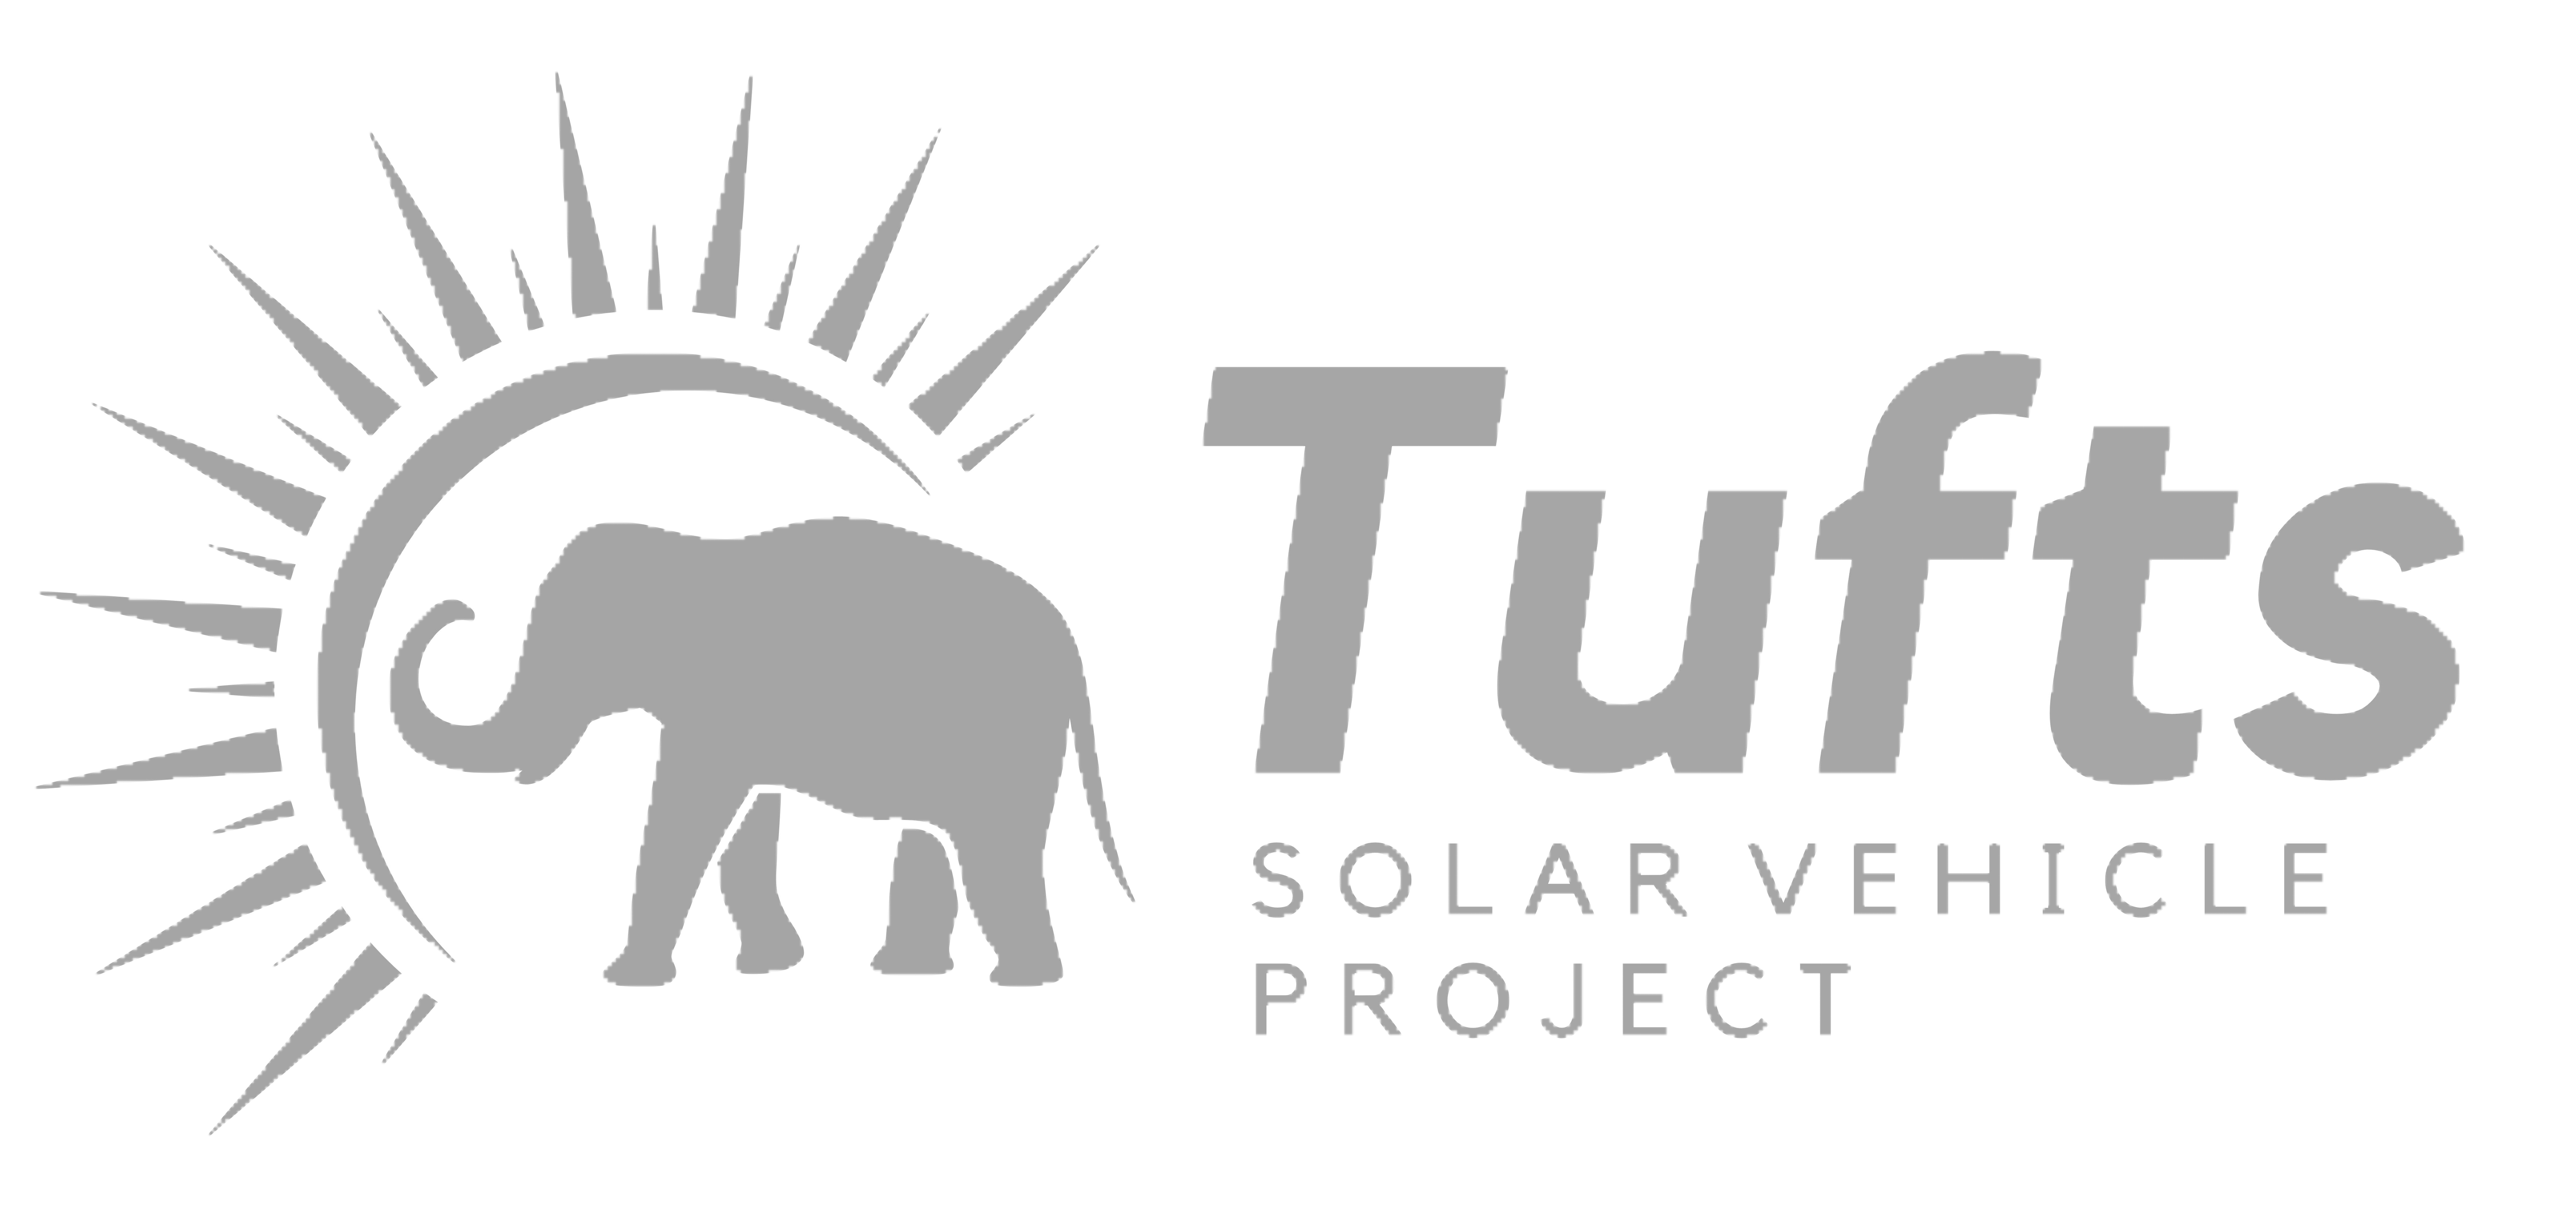 Tufts Solar Vehicle Project